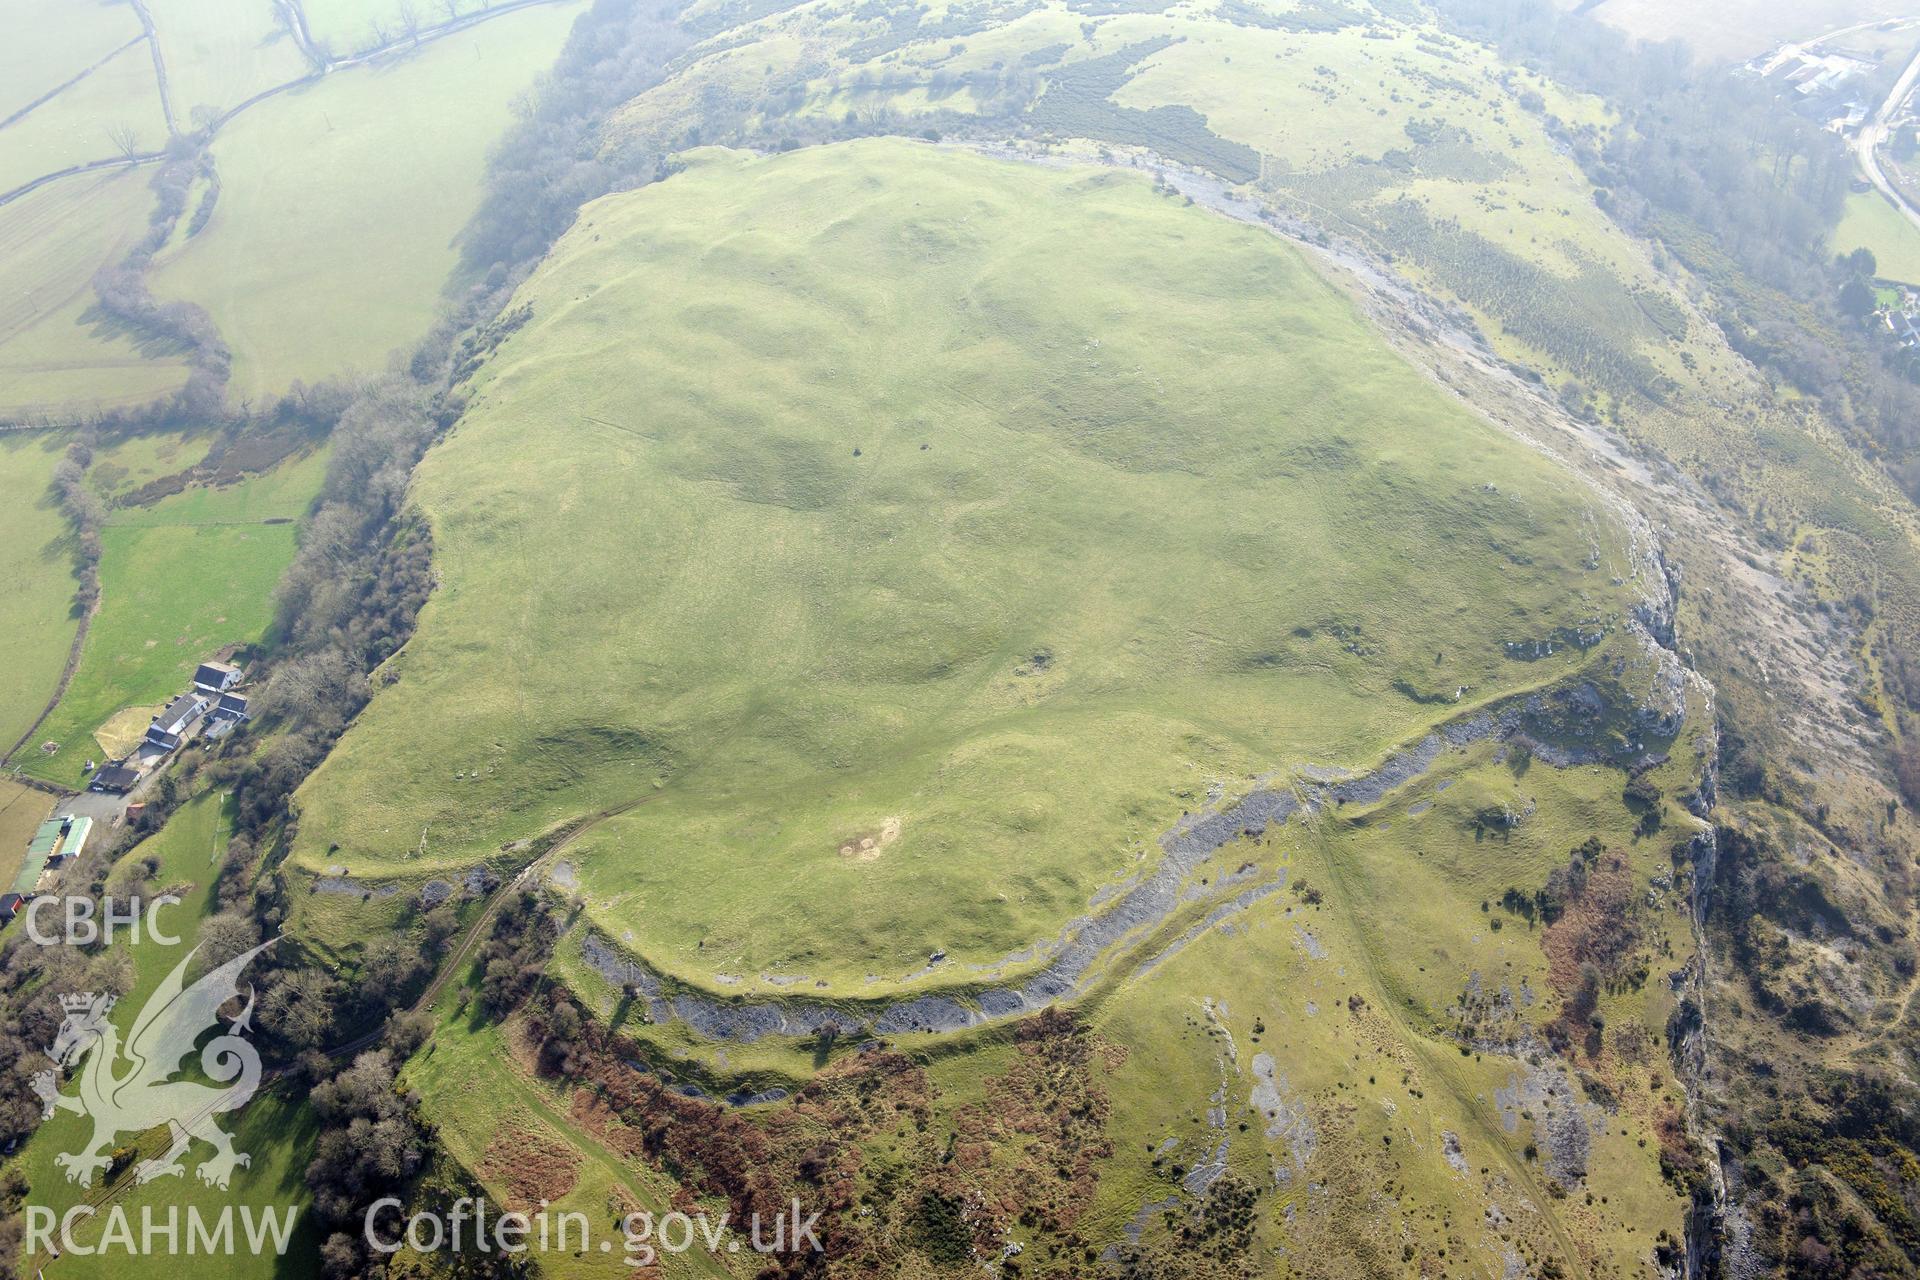 Pen-y-Corddyn-Mawr hillfort, Abergele. Oblique aerial photograph taken during the Royal Commission?s programme of archaeological aerial reconnaissance by Toby Driver on 28th February 2013.